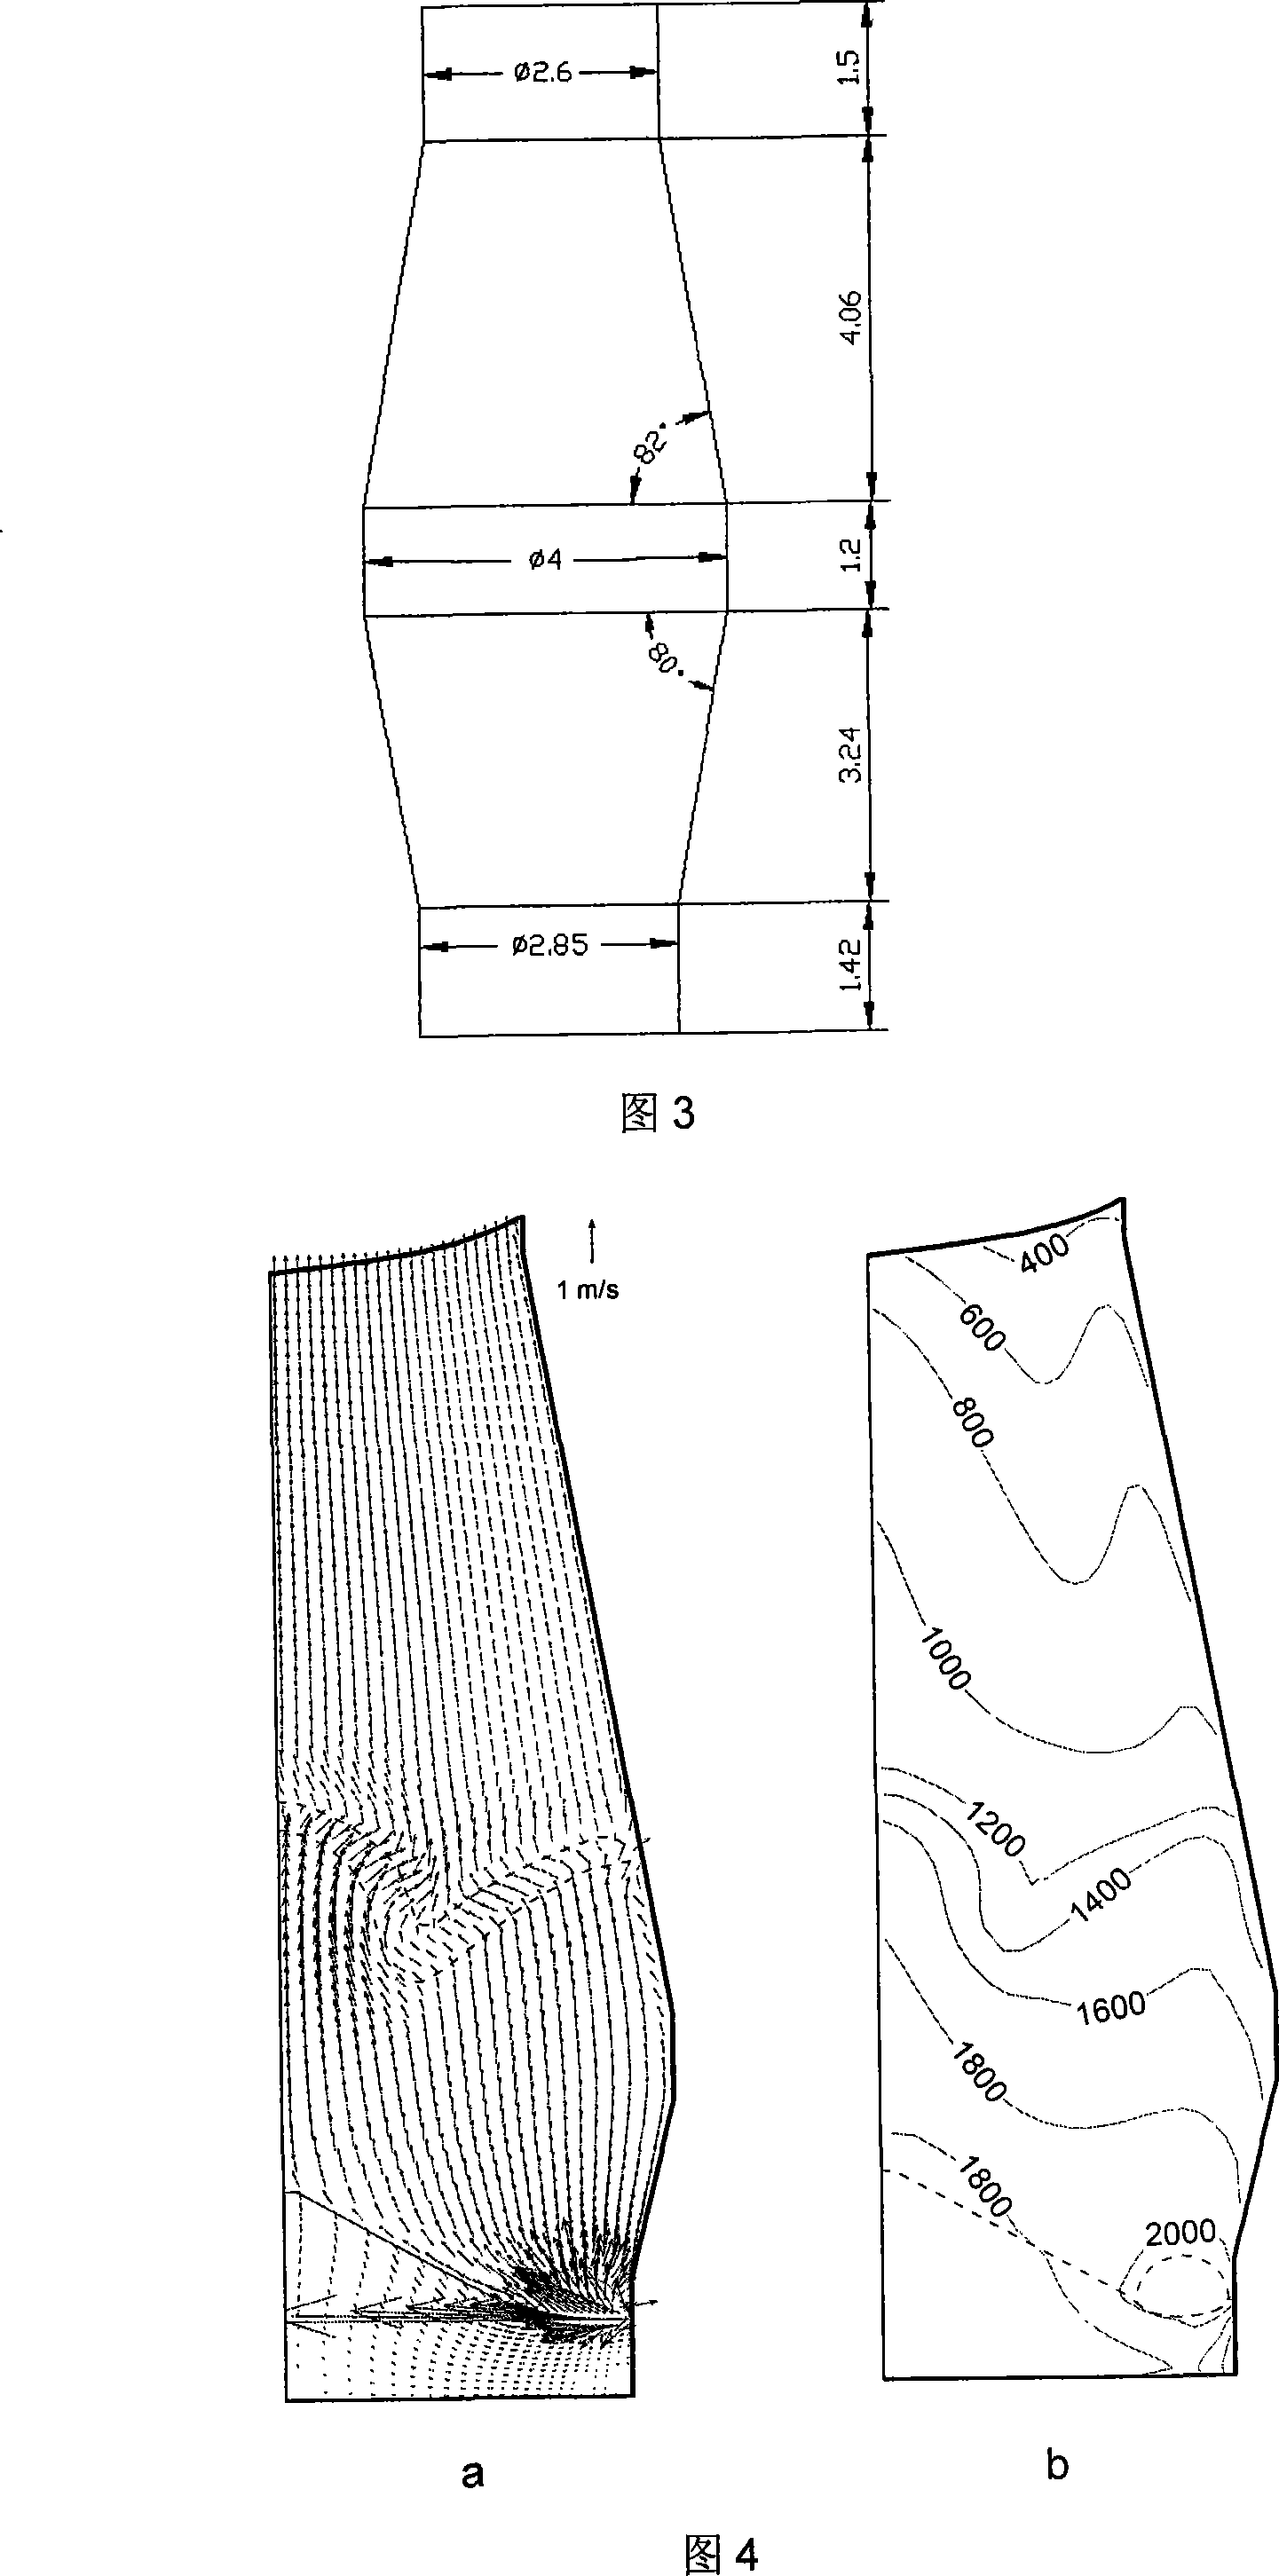 Method for fusing reducing iron by employing iron ore hot pressing carbon-containing agglomerate